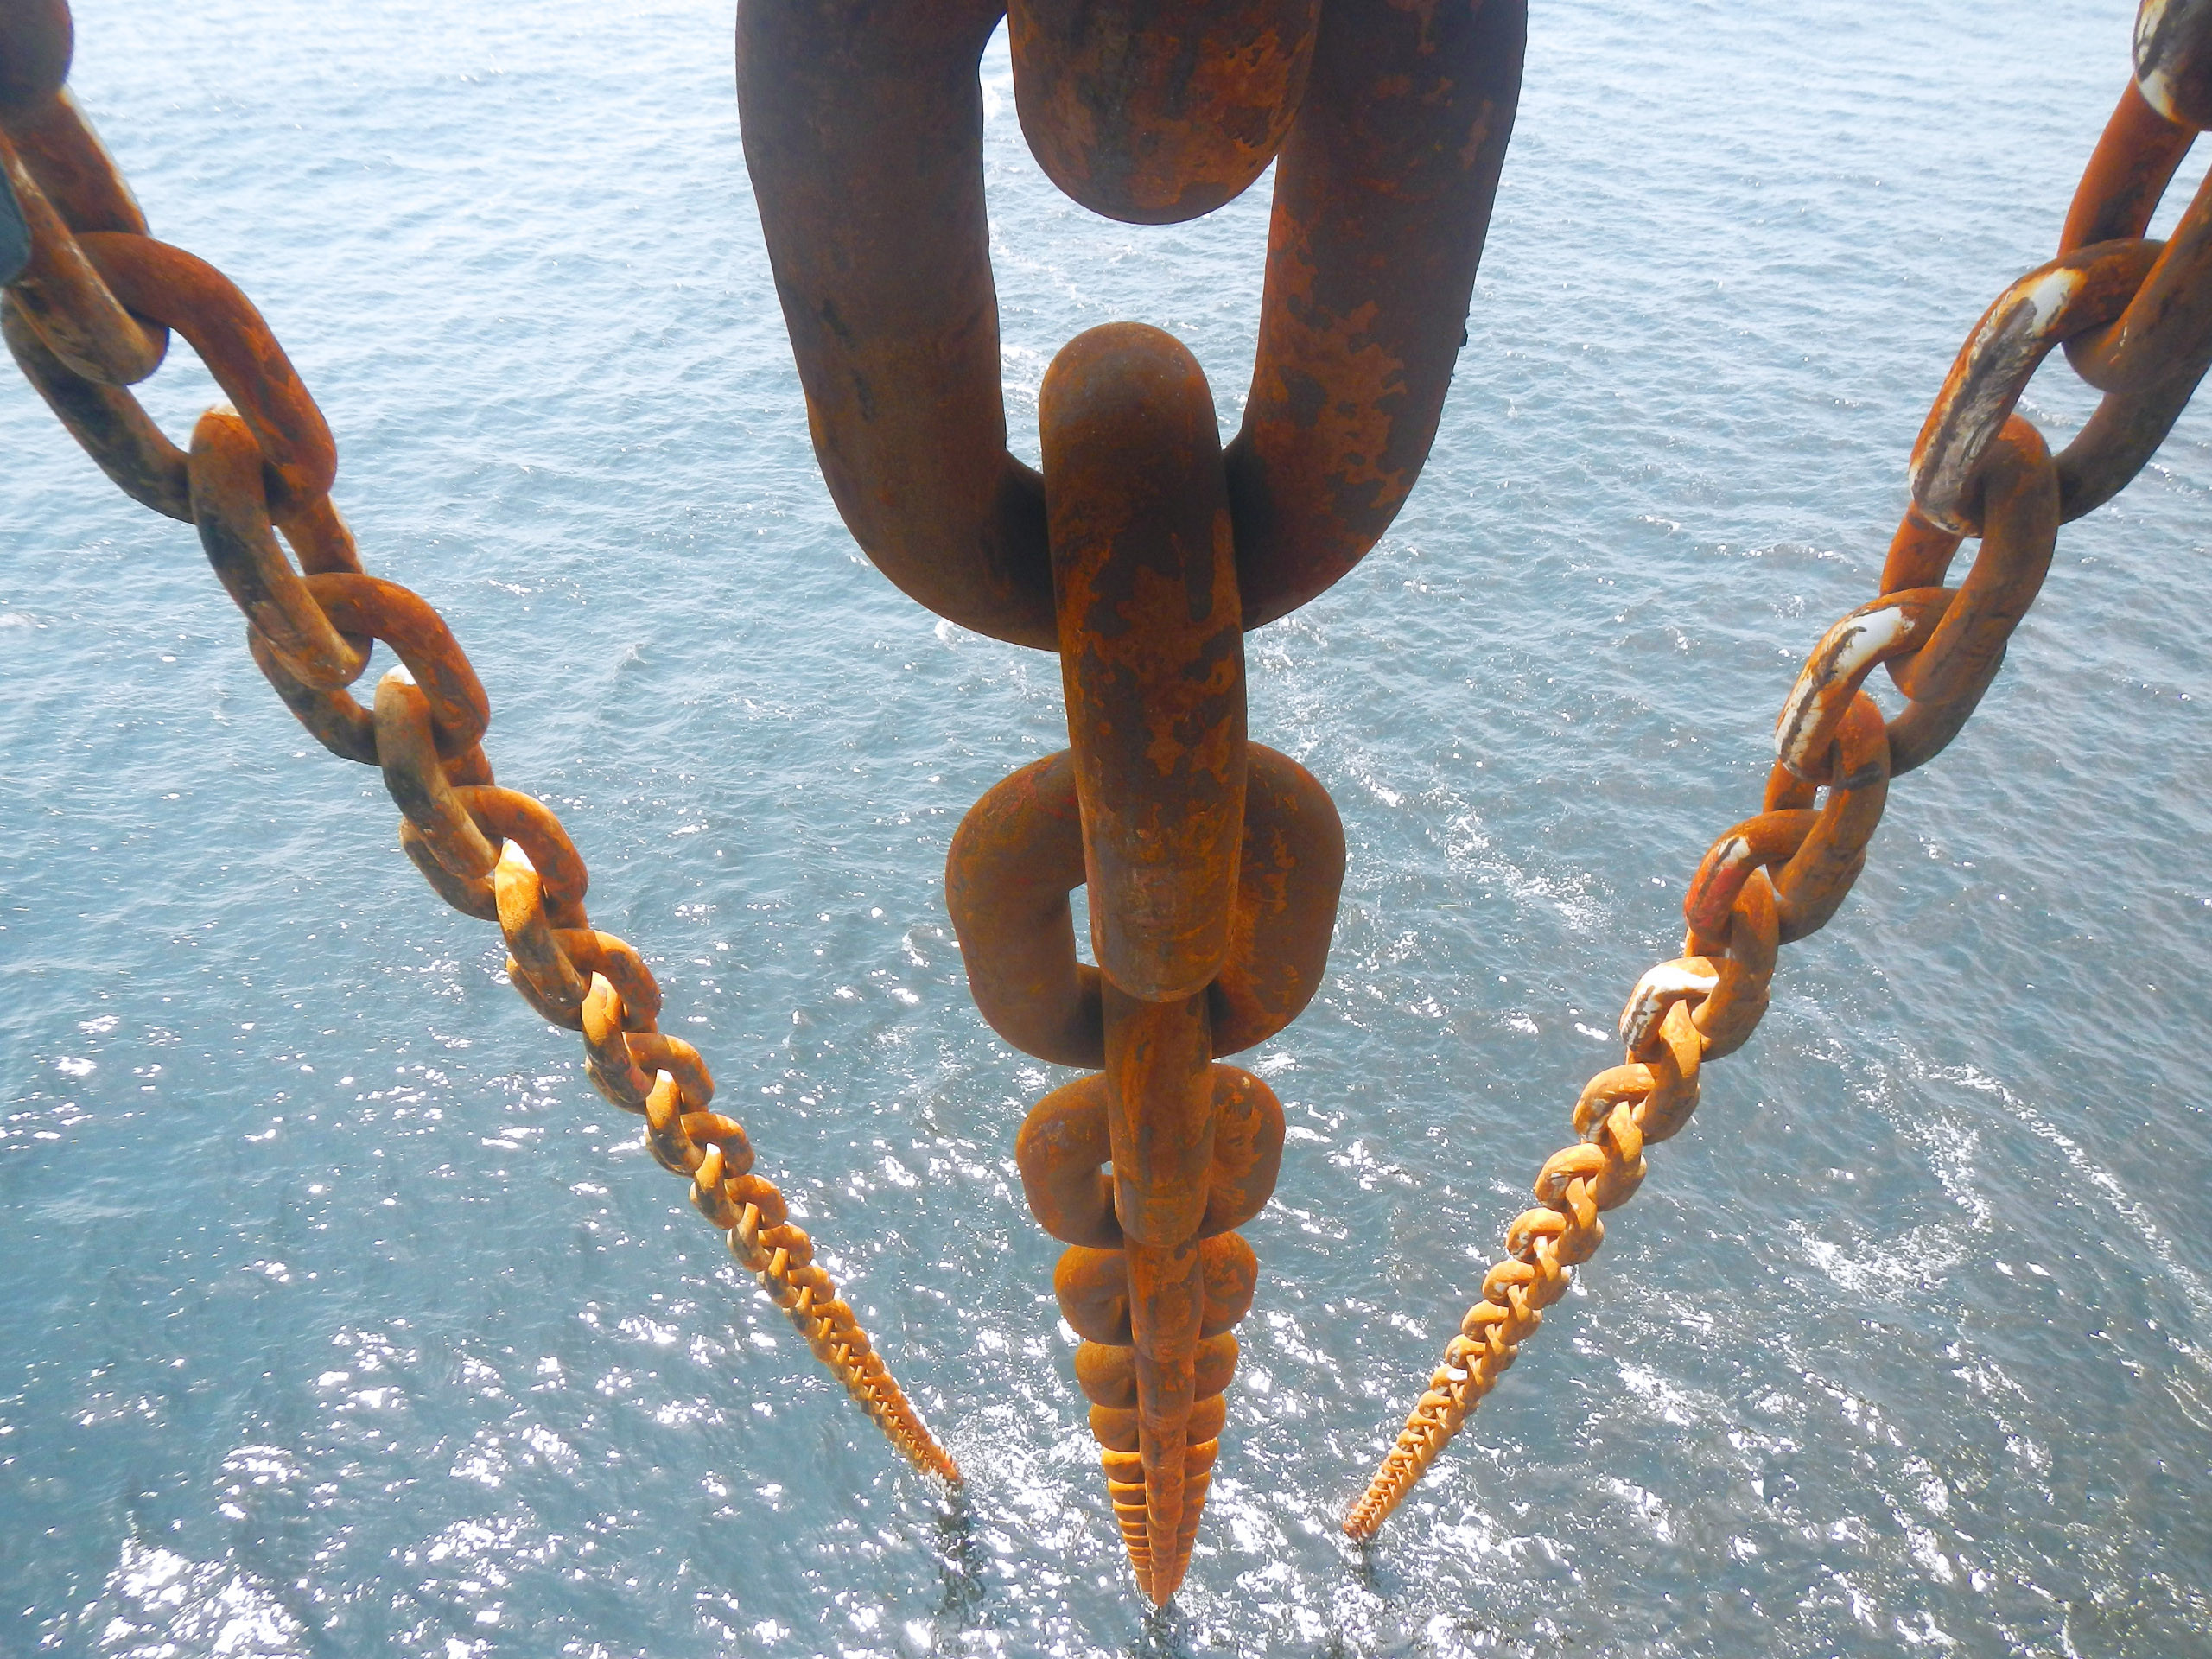 Tensioning of chains that keep the FPSO in place